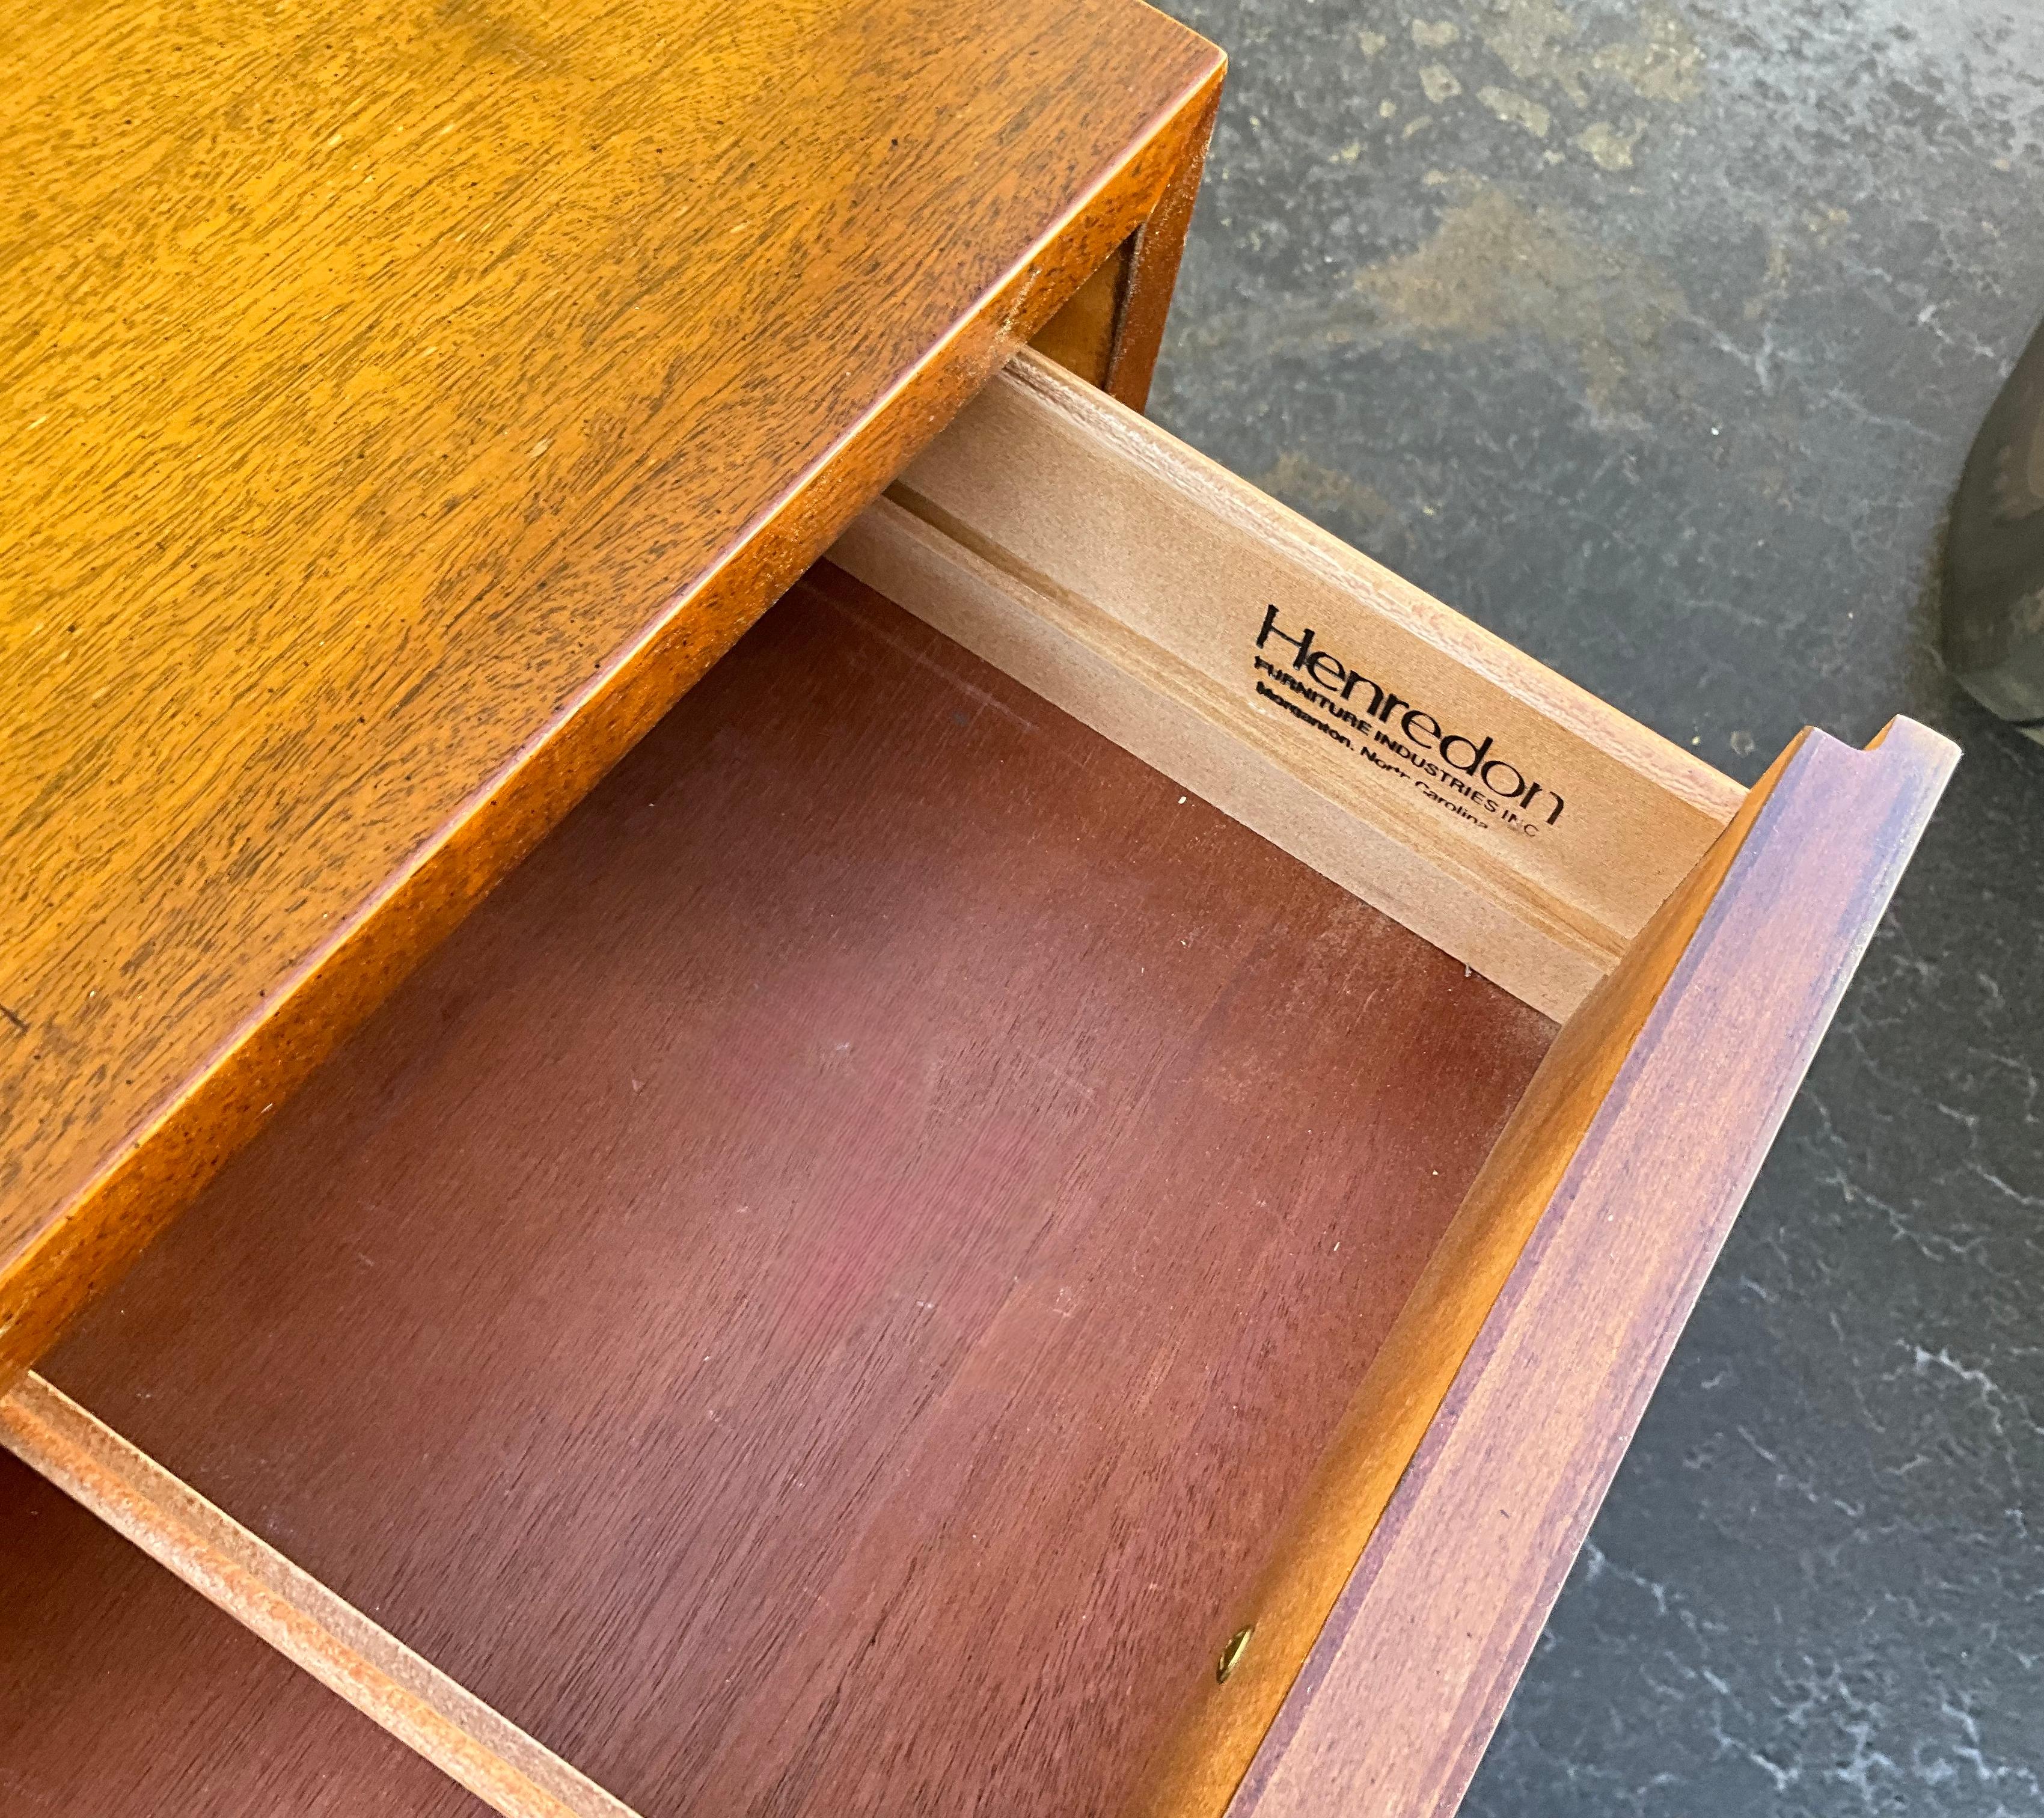 This is a walnut credenza with Ming styling designed by Michael Taylor for Henredon. It is in very good condition. The piece is marked, and the drawers have dovetail construction. 

The shipping is running two to five weeks. If a COI or ferry is